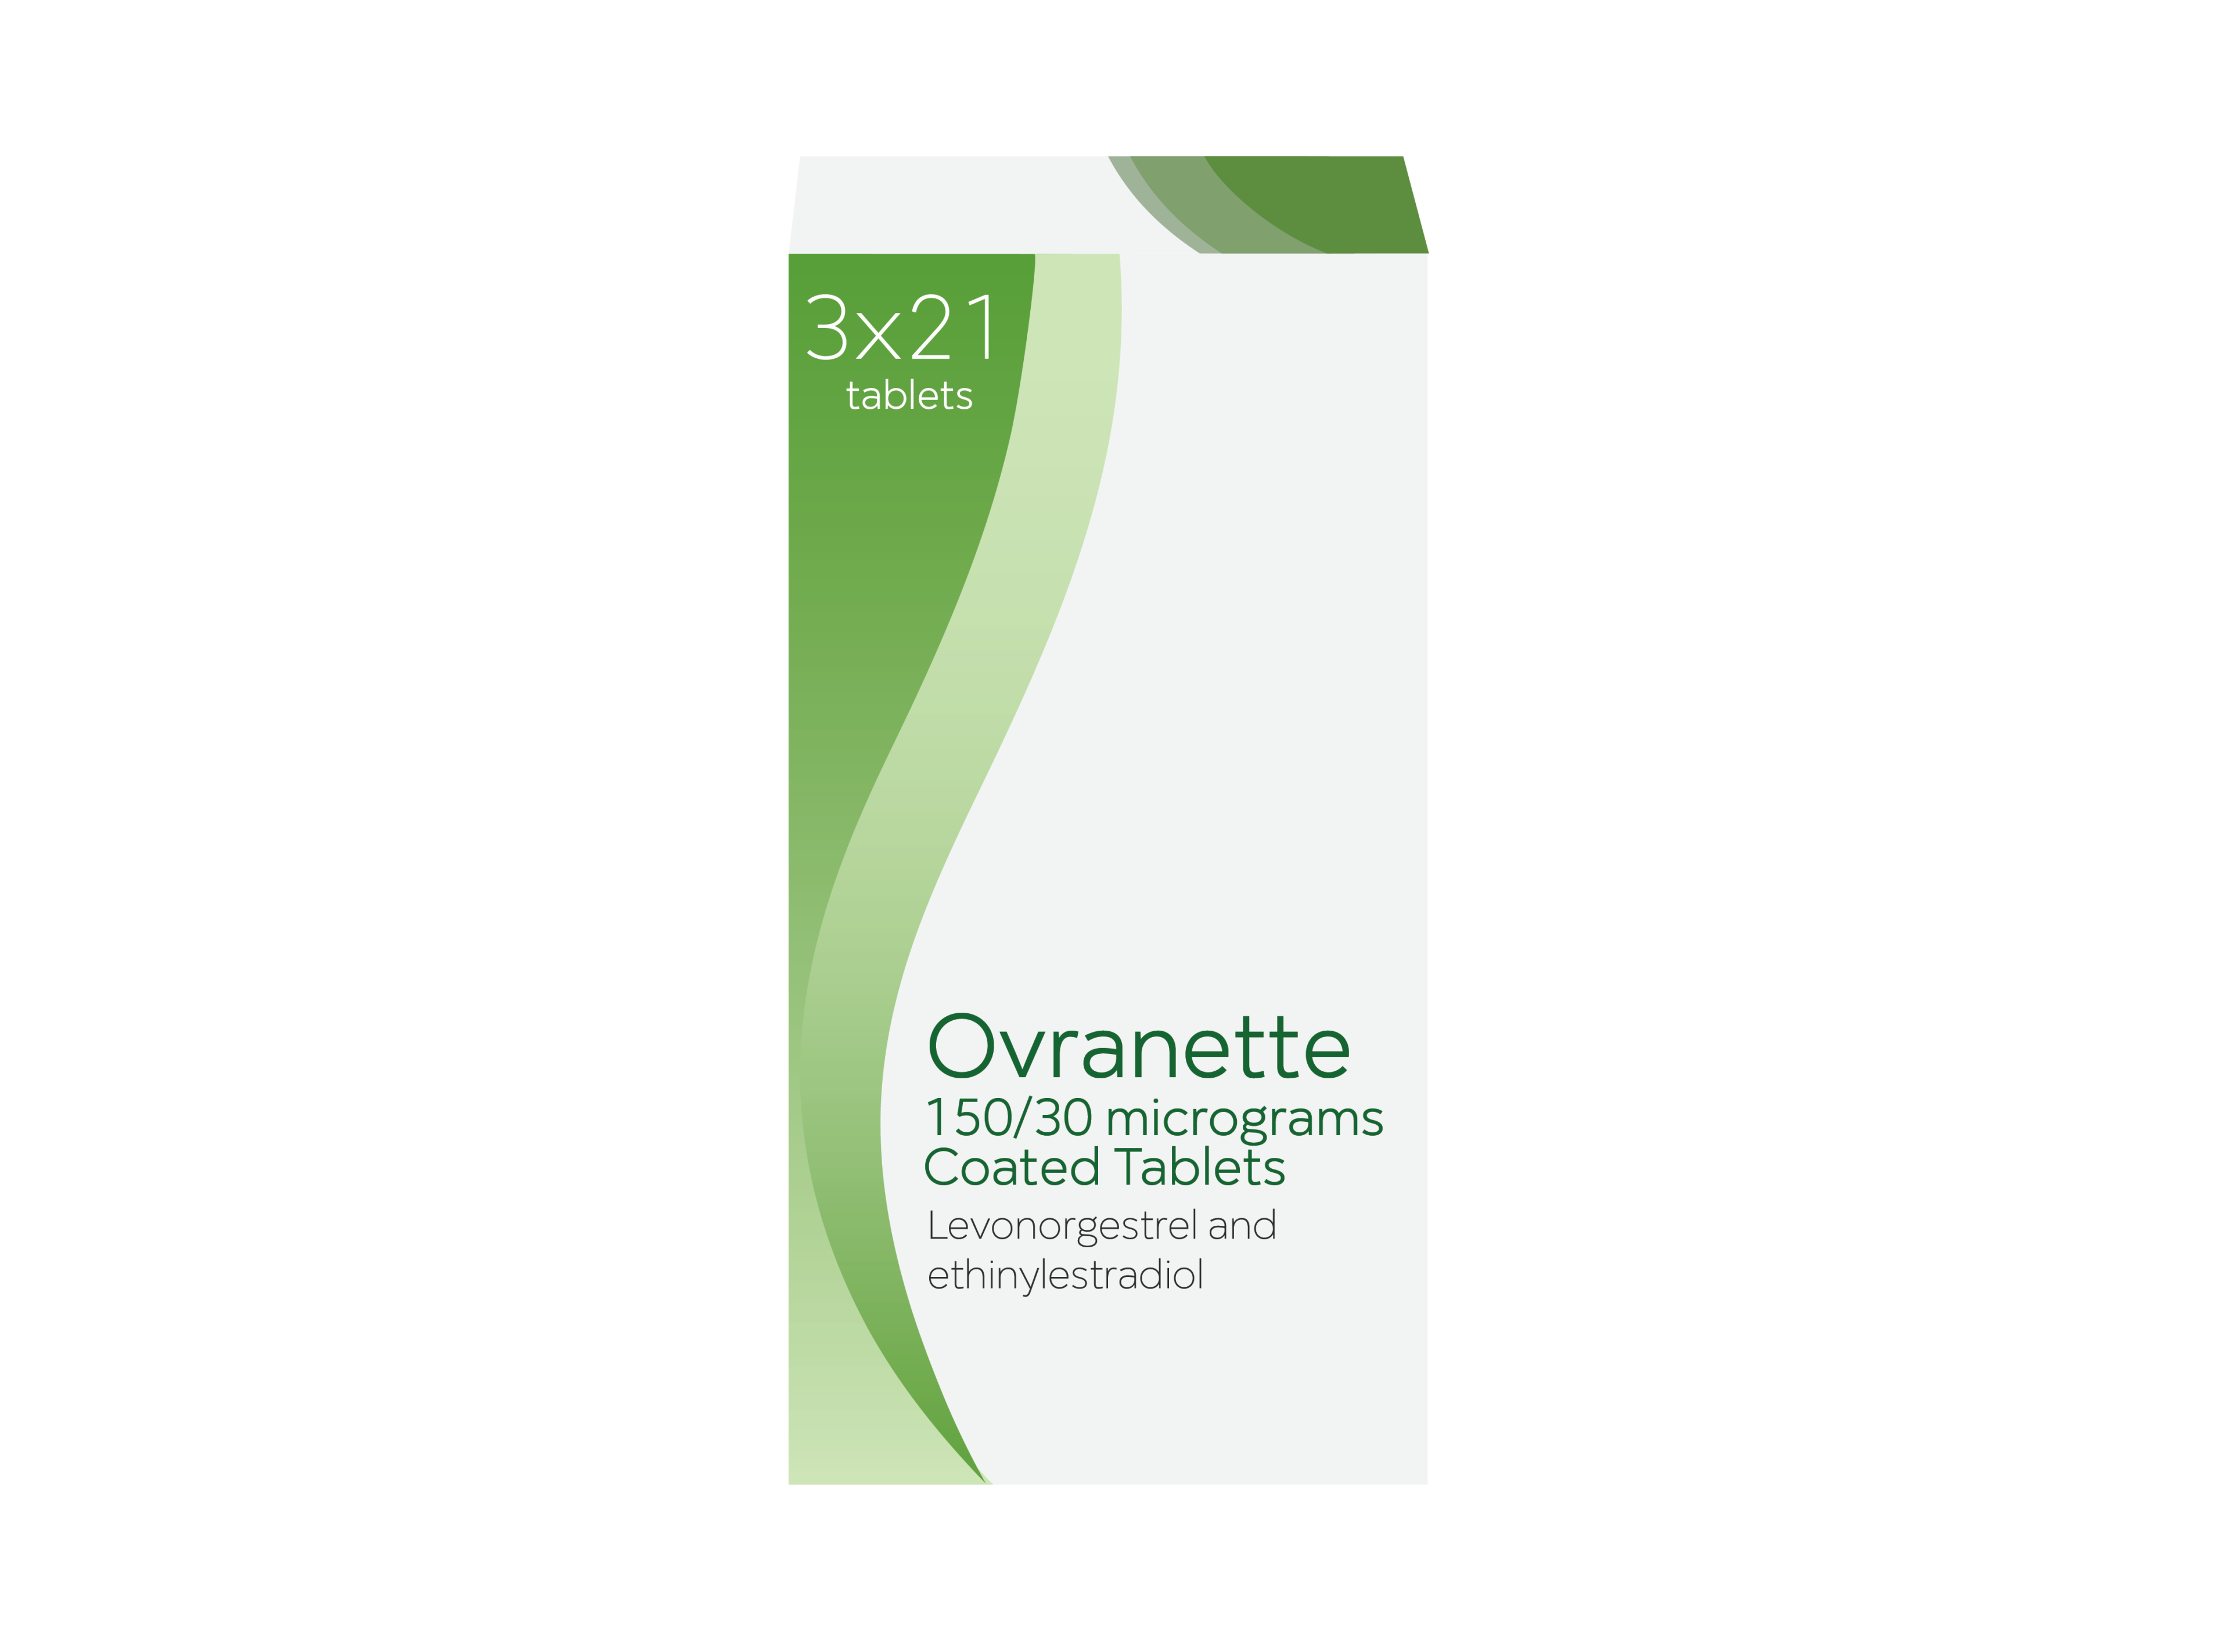 Ovranette 3 x 21 tablets, 150/30 micrograms coated tablets, levonogestrel and ethinylestradiol